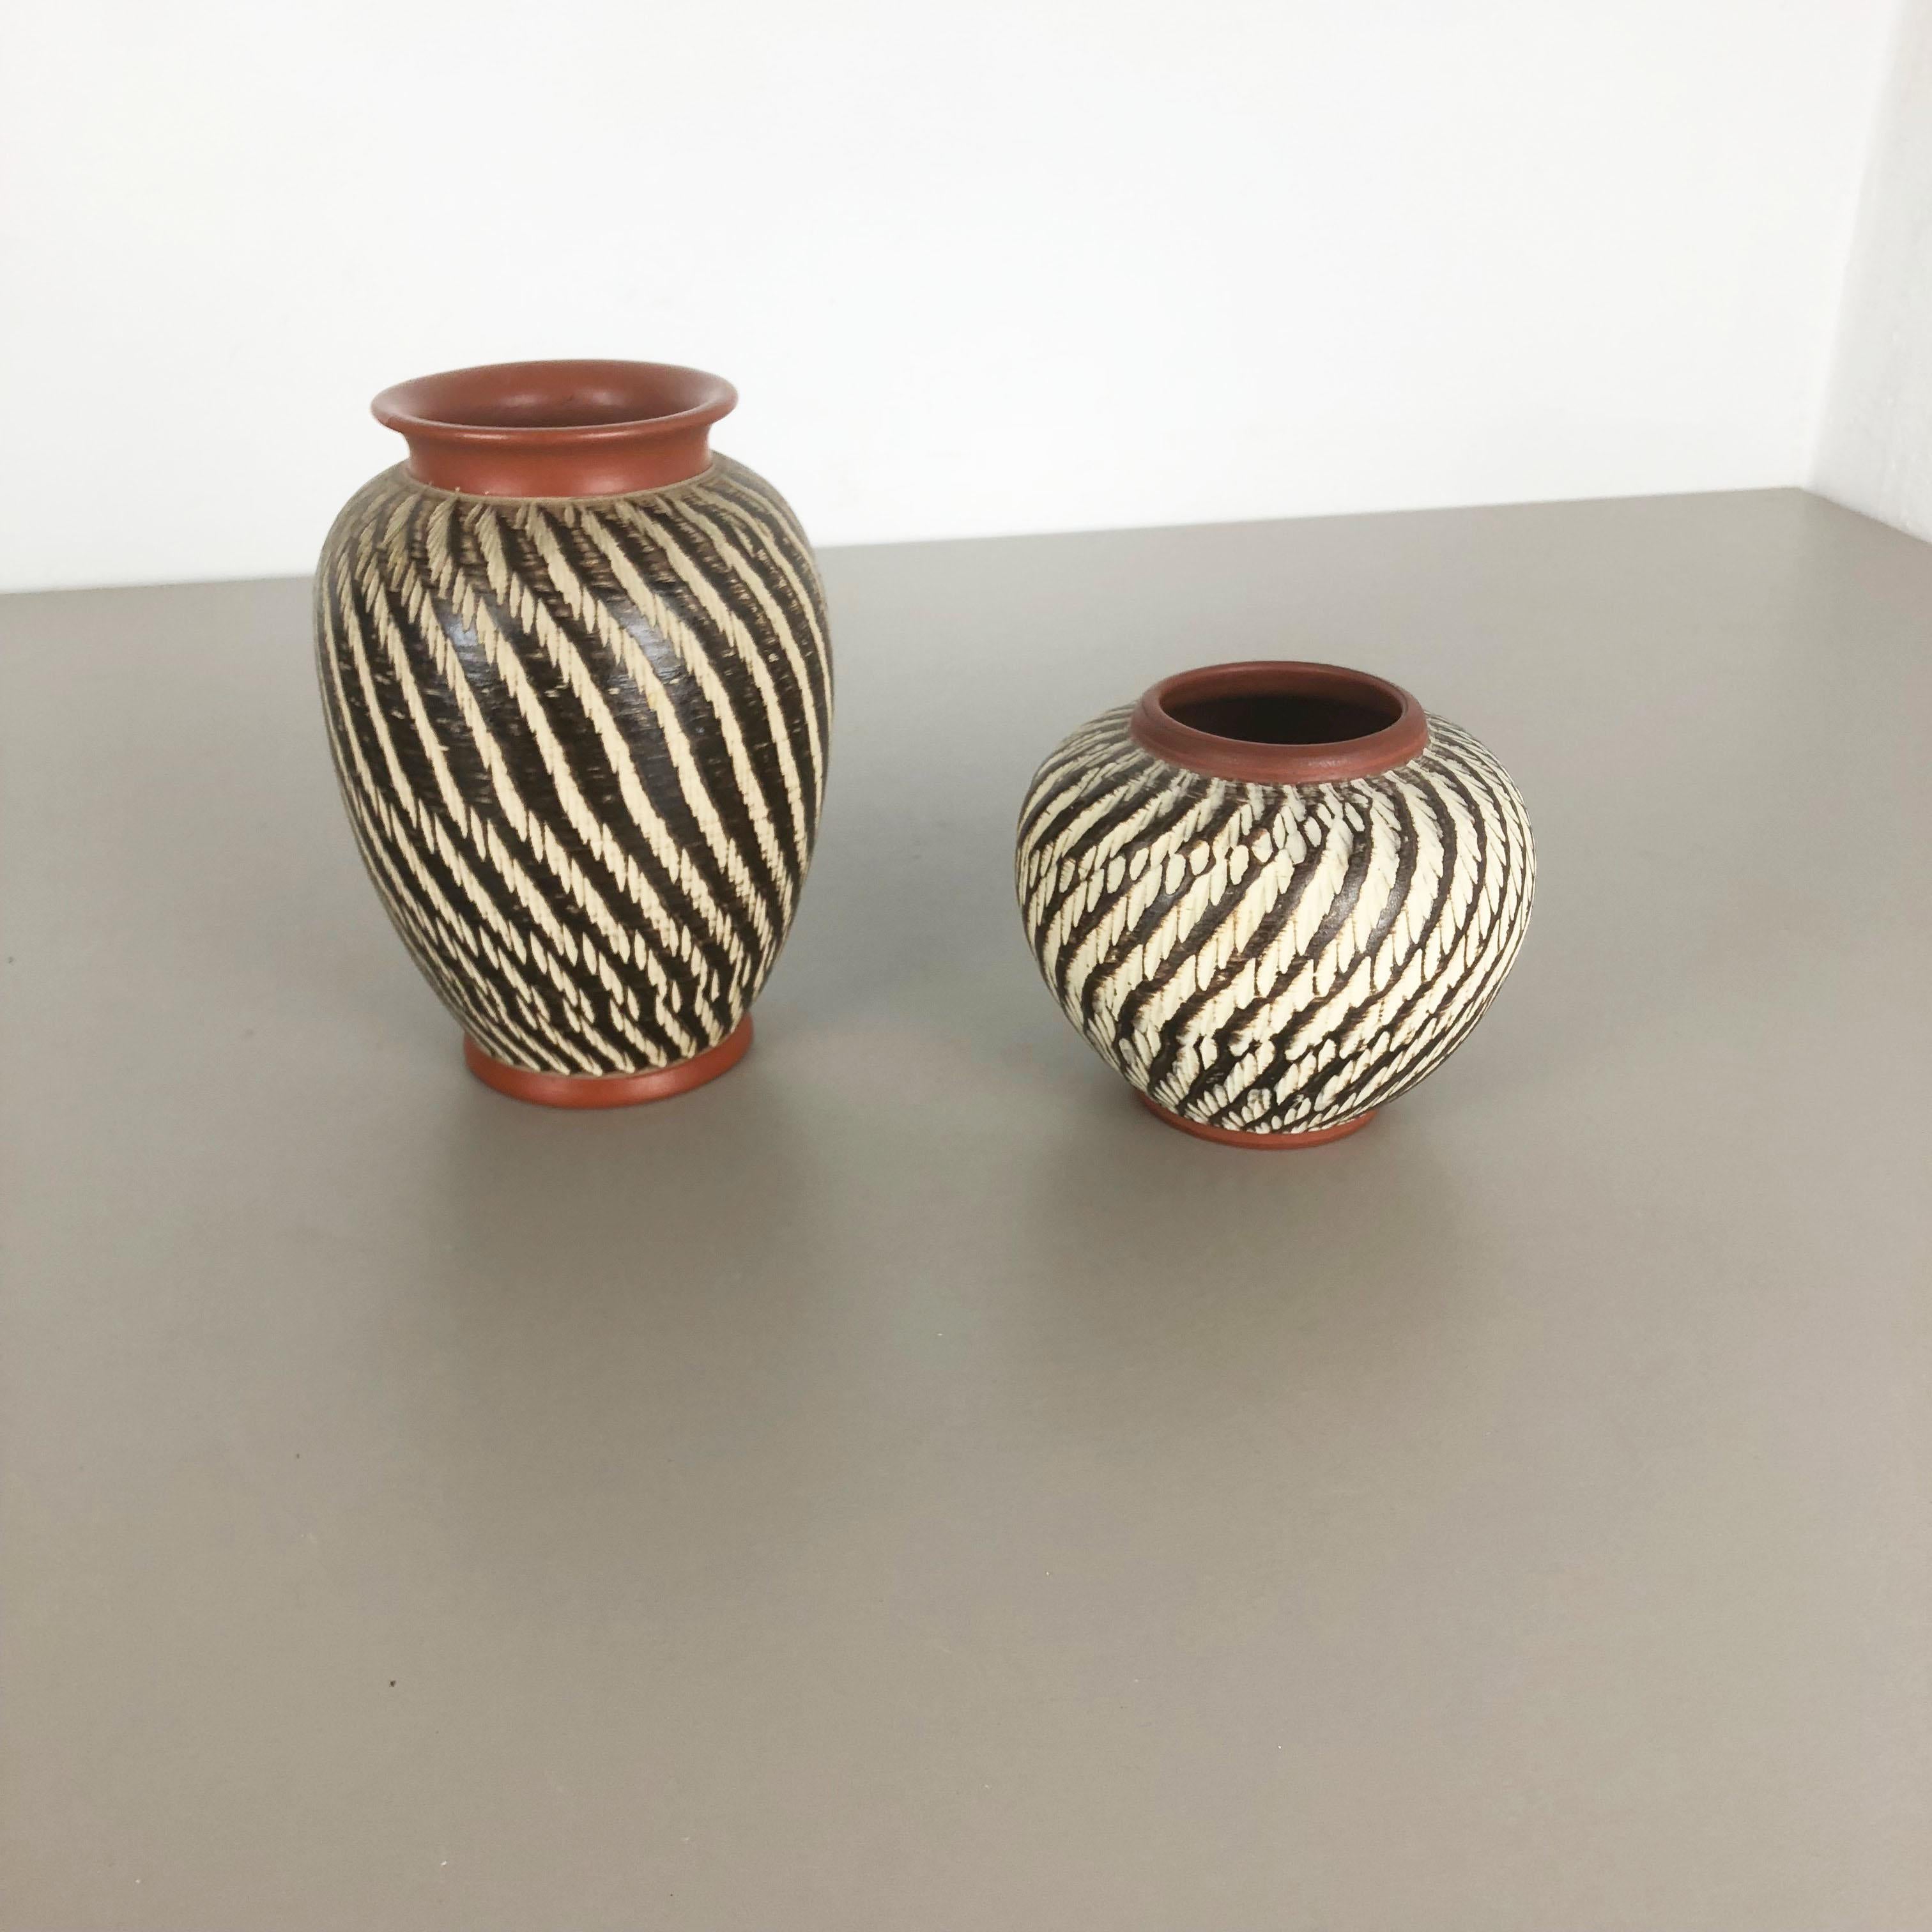 Article:

Set of two abstract vases



Producer:

WEKARA, Germany



Decade:

1960s


These original vintage vases was produced in the 1960s in Germany. It is made of ceramic pottery with abstract illustration, typical for the age